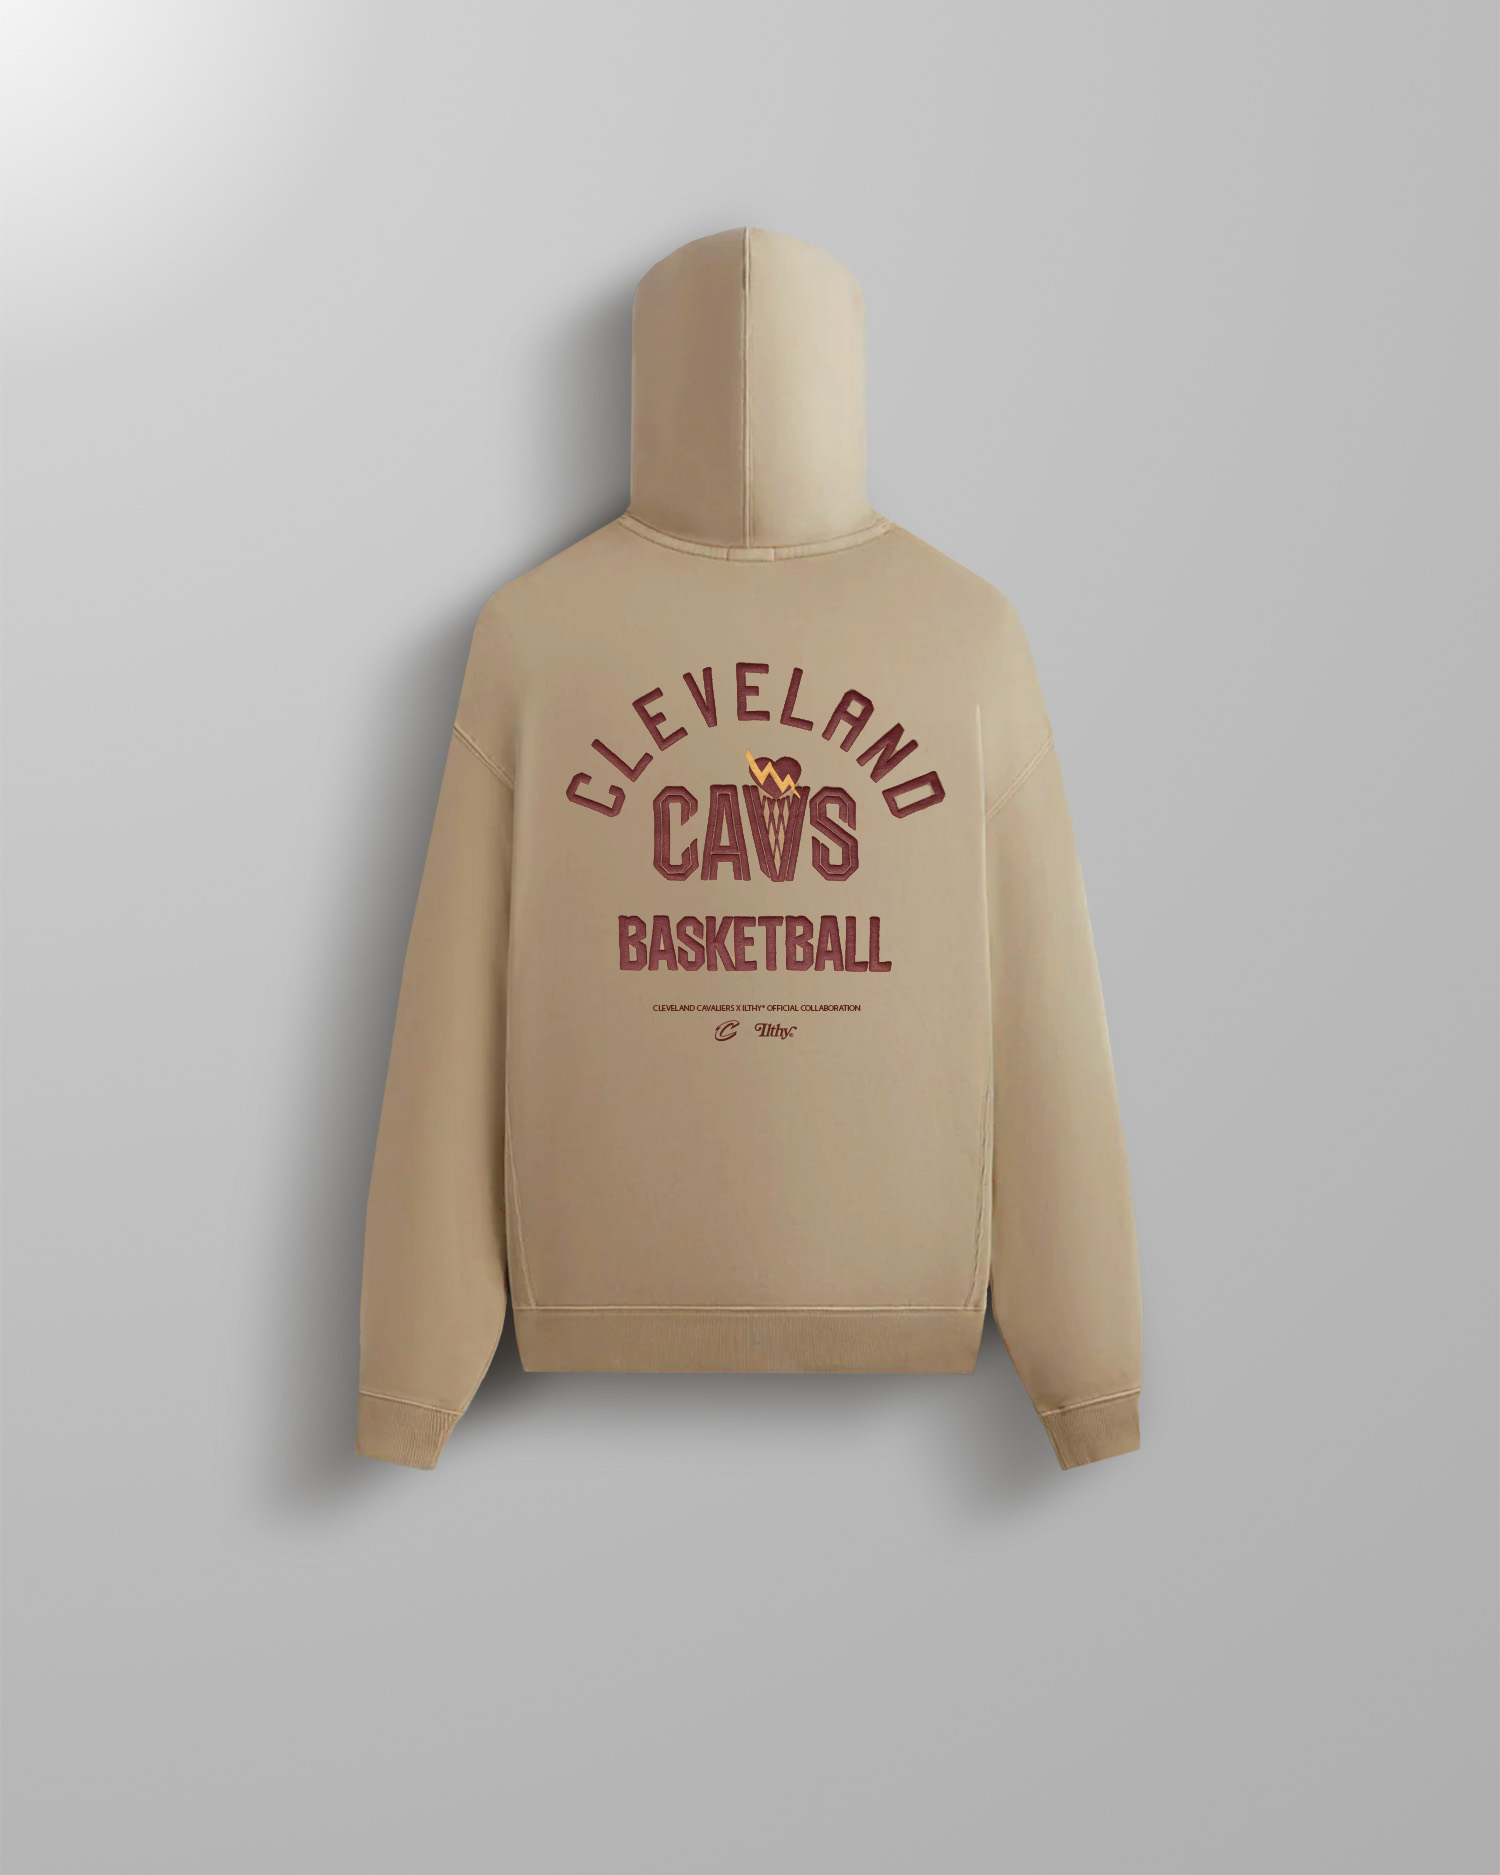 Browns and ILTHY® collaboration continues with second drop of original  Cleveland merchandise